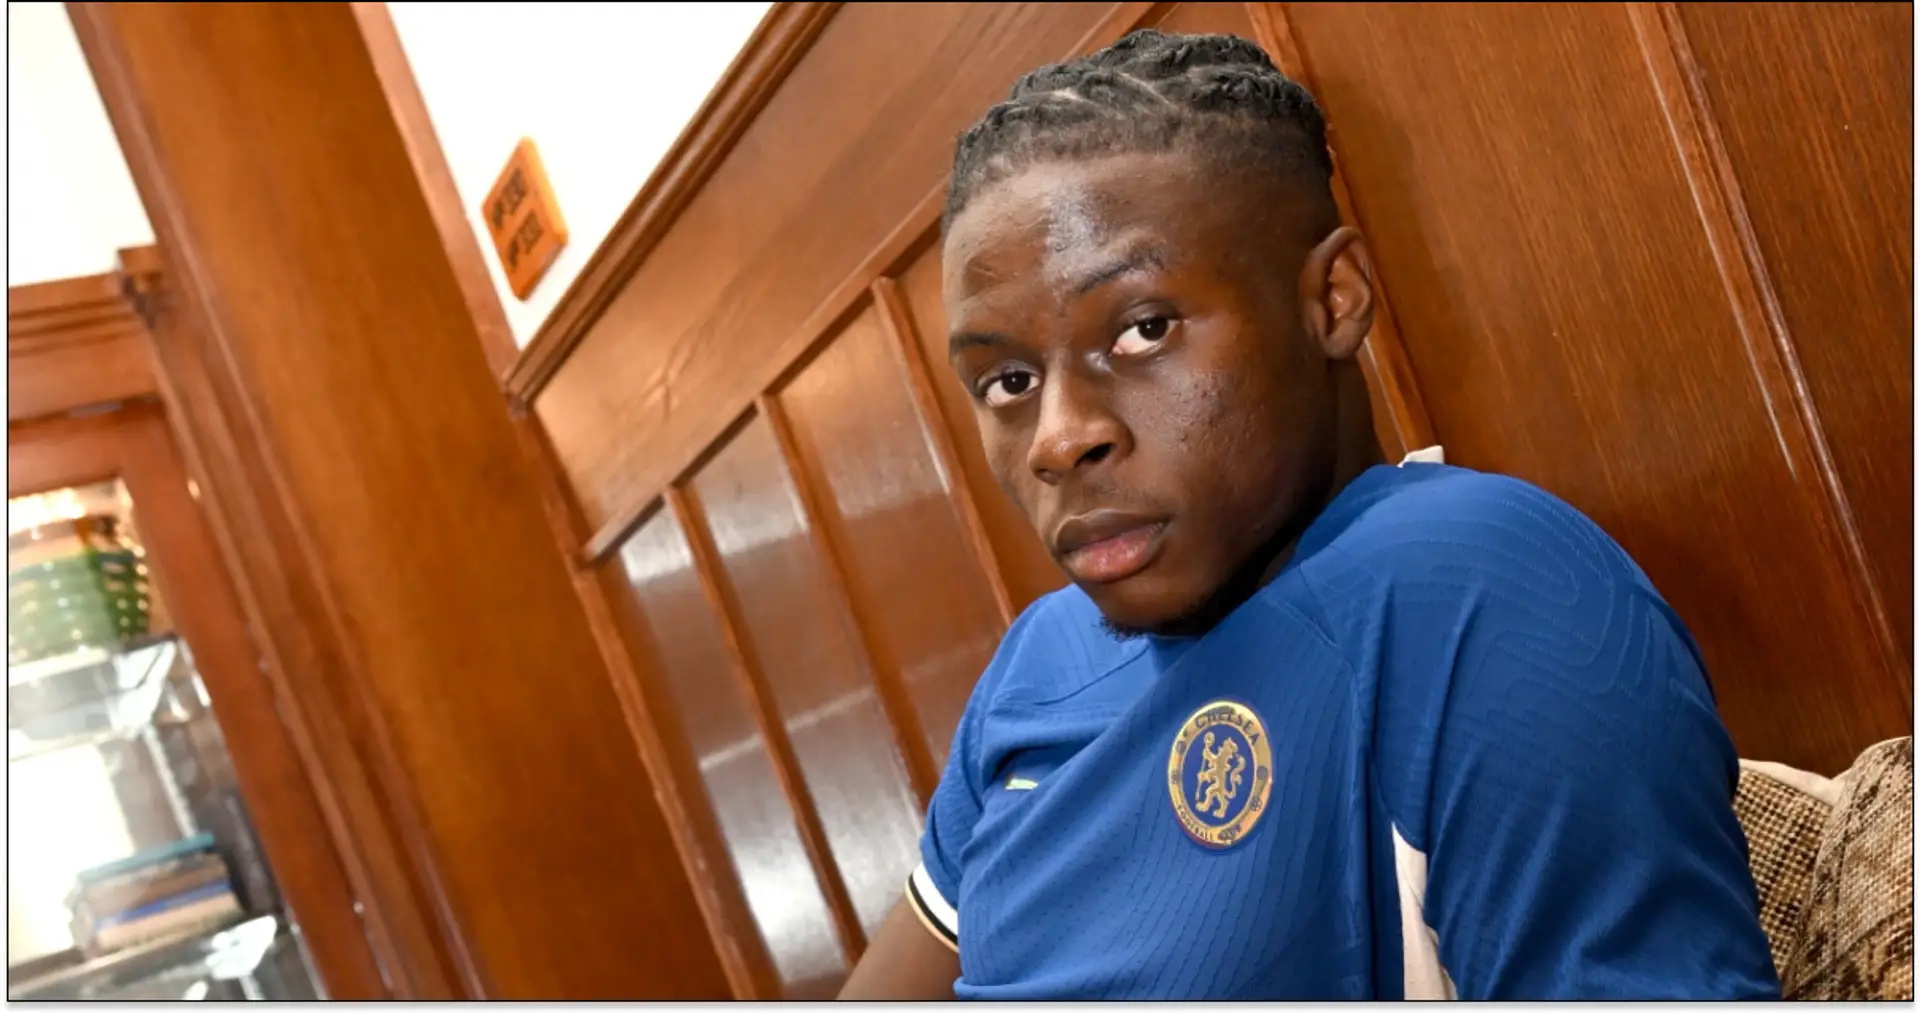 'Some trains don't pass twice': Ugochukwu explains reasoning behind his Chelsea move